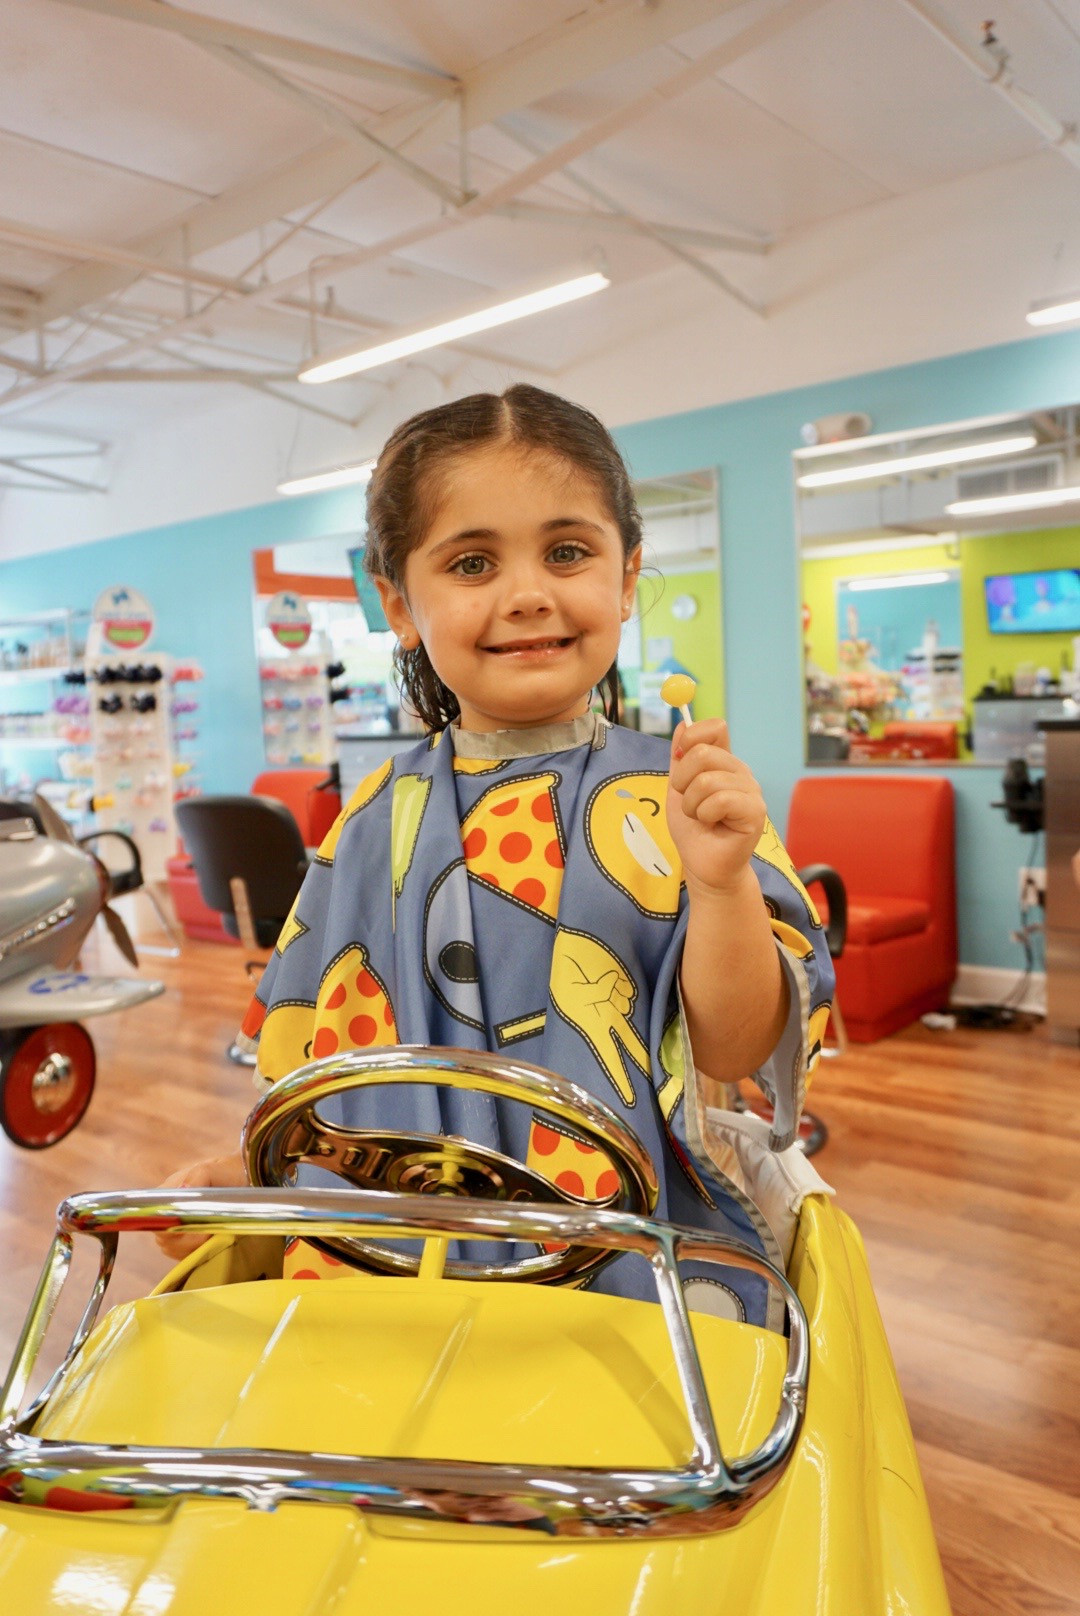 Kids Hair Cut Miami
 Pigtails & Crewcuts The Place to Take Your Kids for a